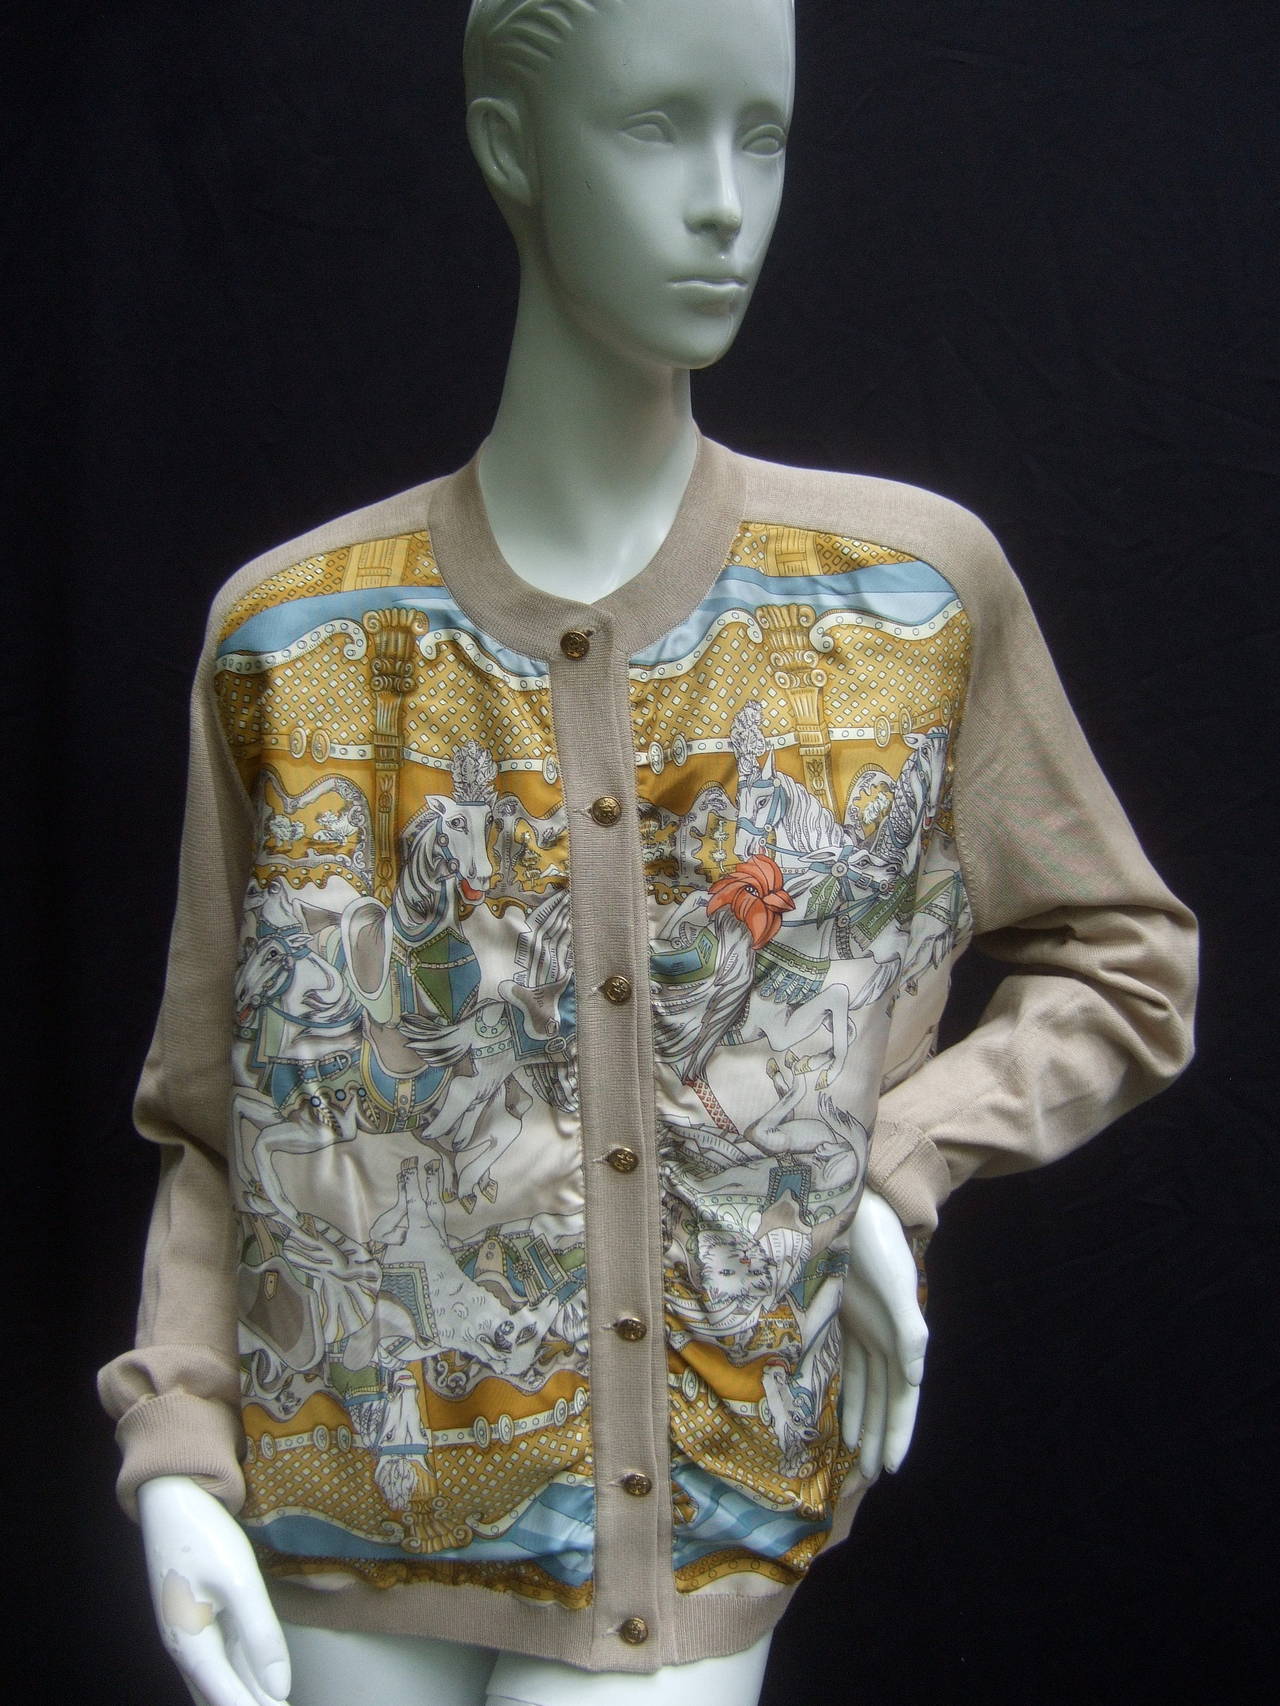 Hermes Paris Luxurious silk panel cardigan Size 46
The elegant cardigan is illustrated with a collage
of animal figures; horses, roosters. canine, feline.
goats and lamb

The front silk panels range from golden yellows,
ivory and cream, pale